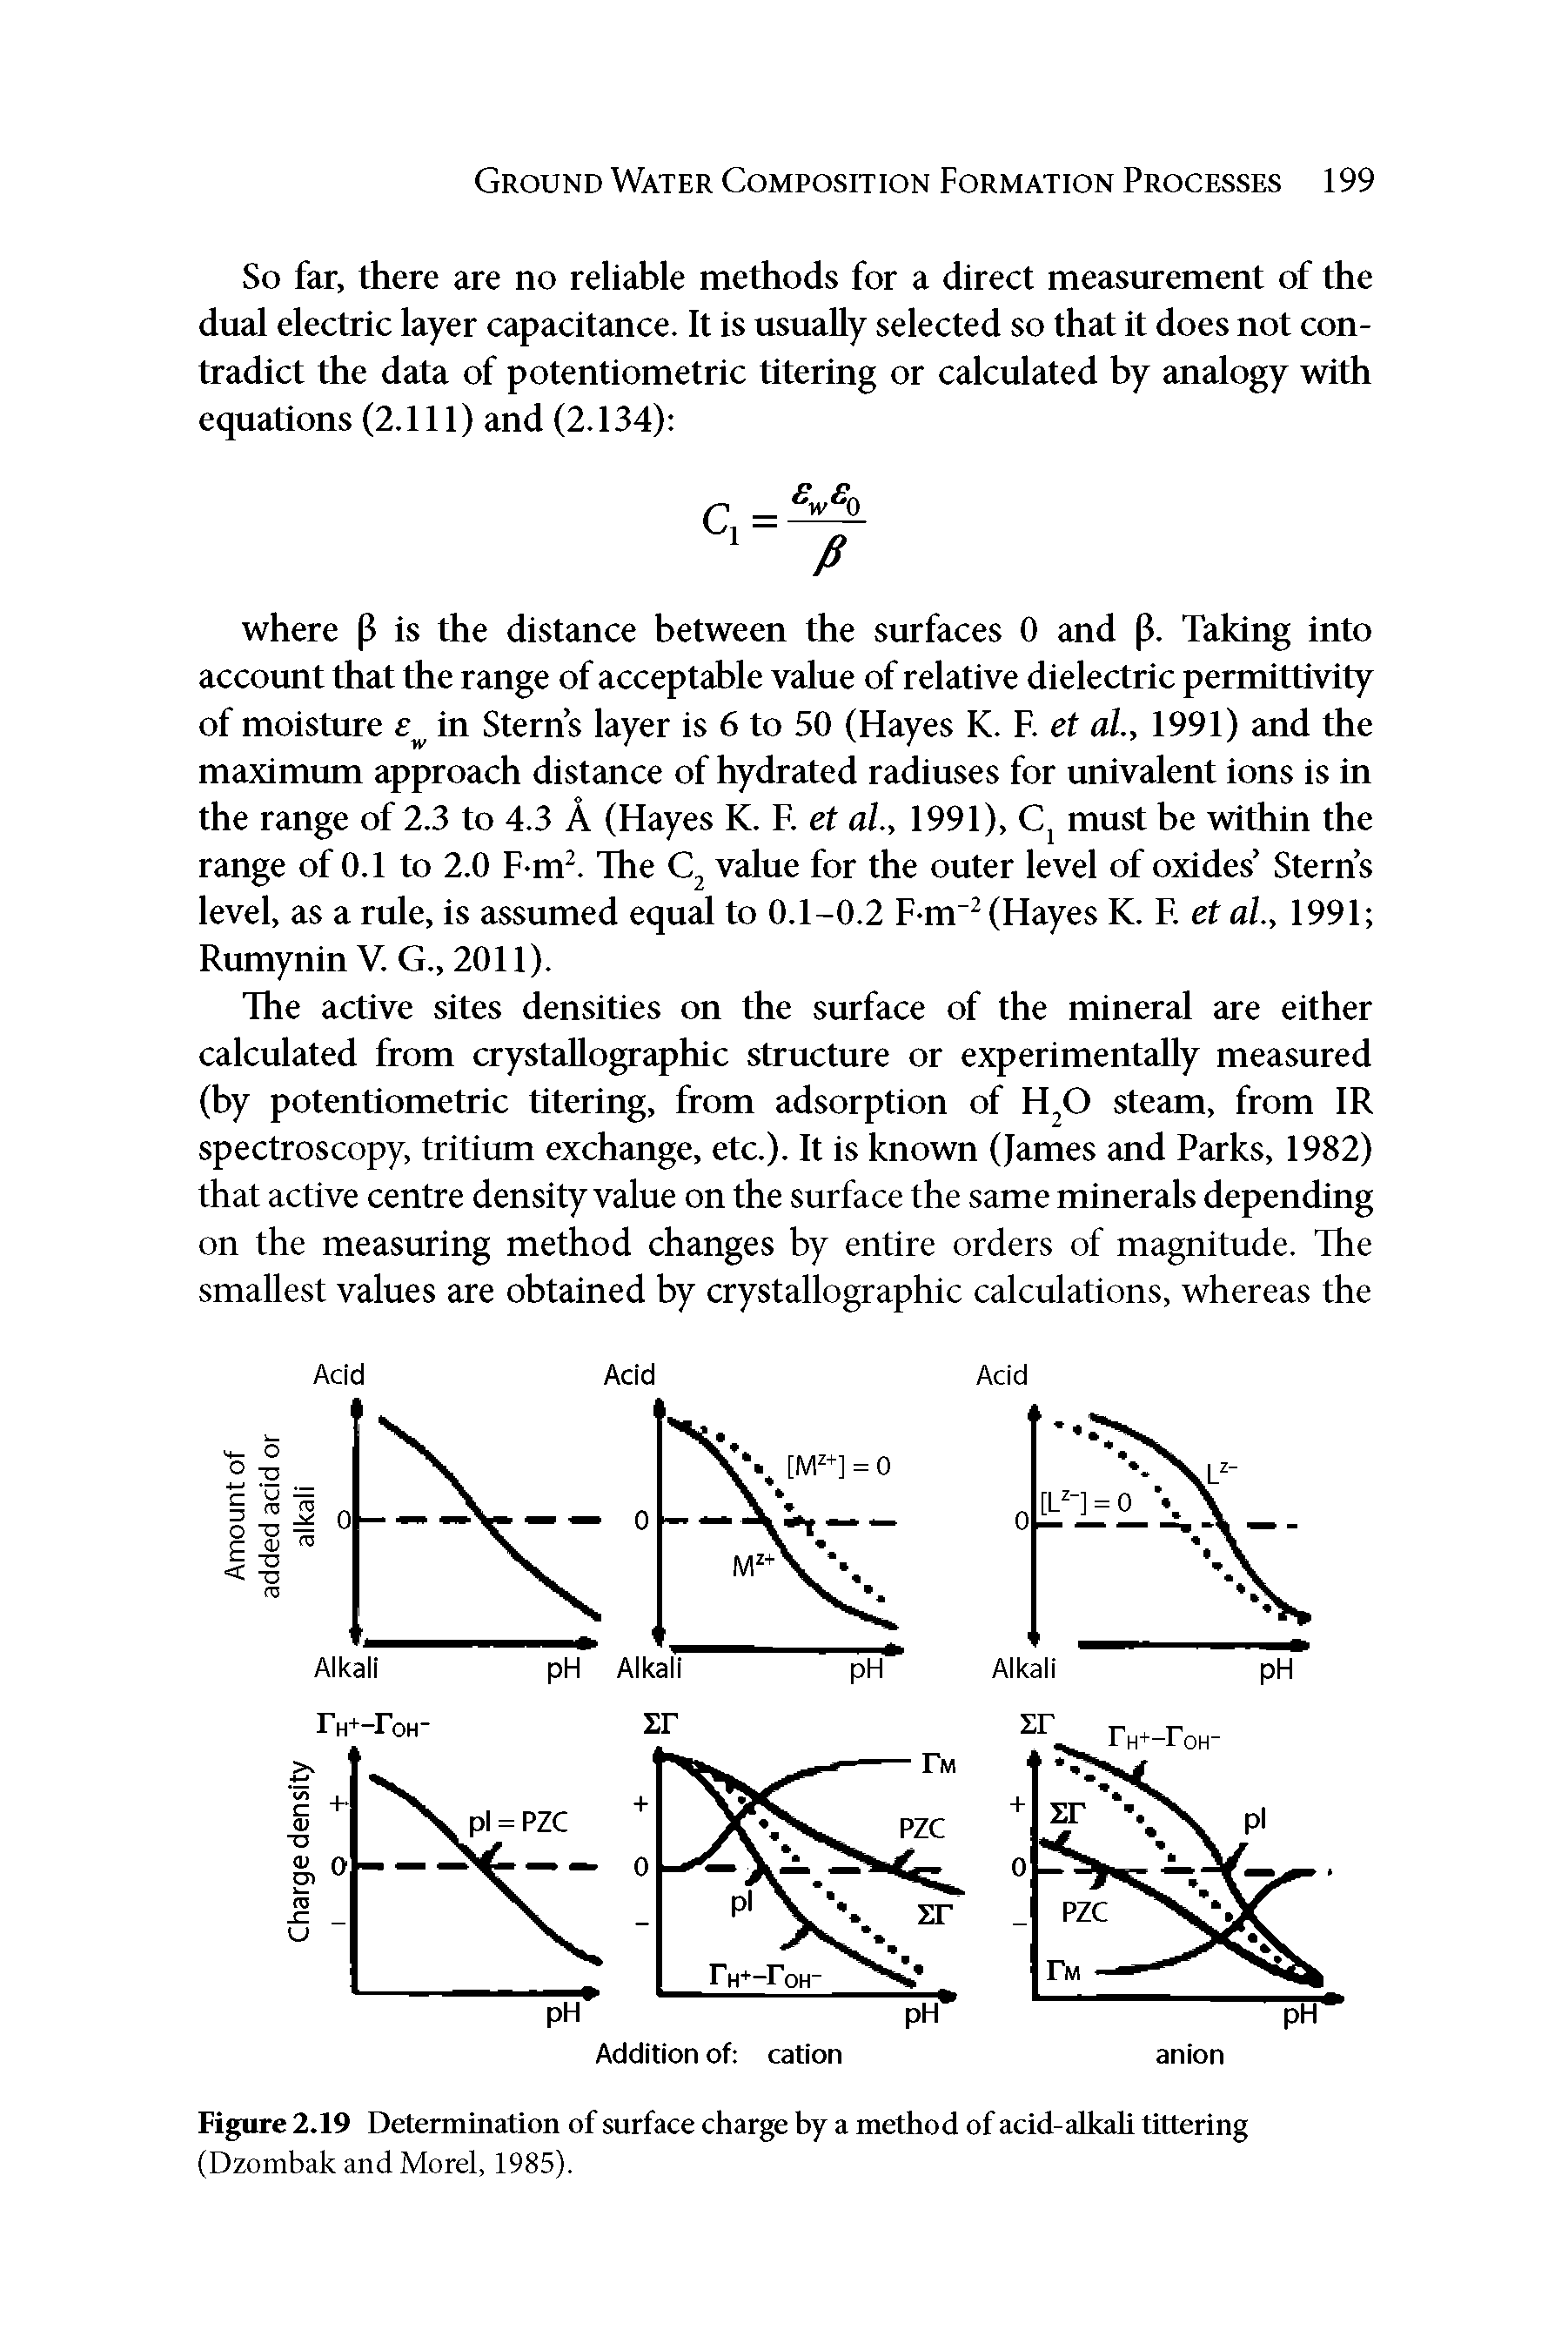 Figure 2.19 Determination of surface charge by a method of acid-alkali tittering...